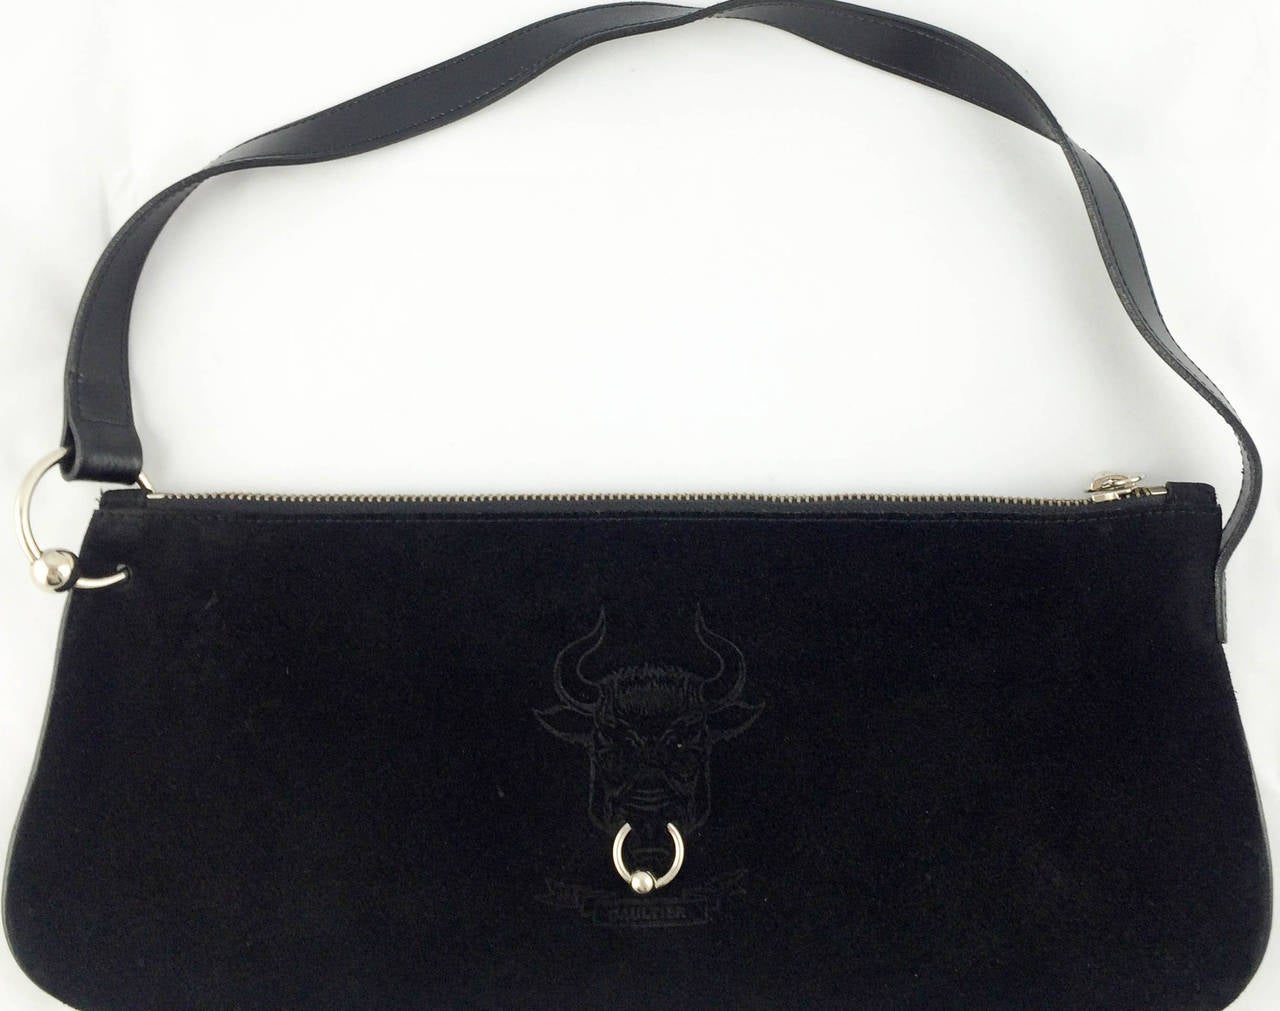 Funky Jean Paul Gaultier Bullring Handbag. This hip design by Jean Paul Gaultier is made in black velvet calfskin. The front of the bag shows a bull with a real bullring through the material, which is repeated in the zipper and one of the links to